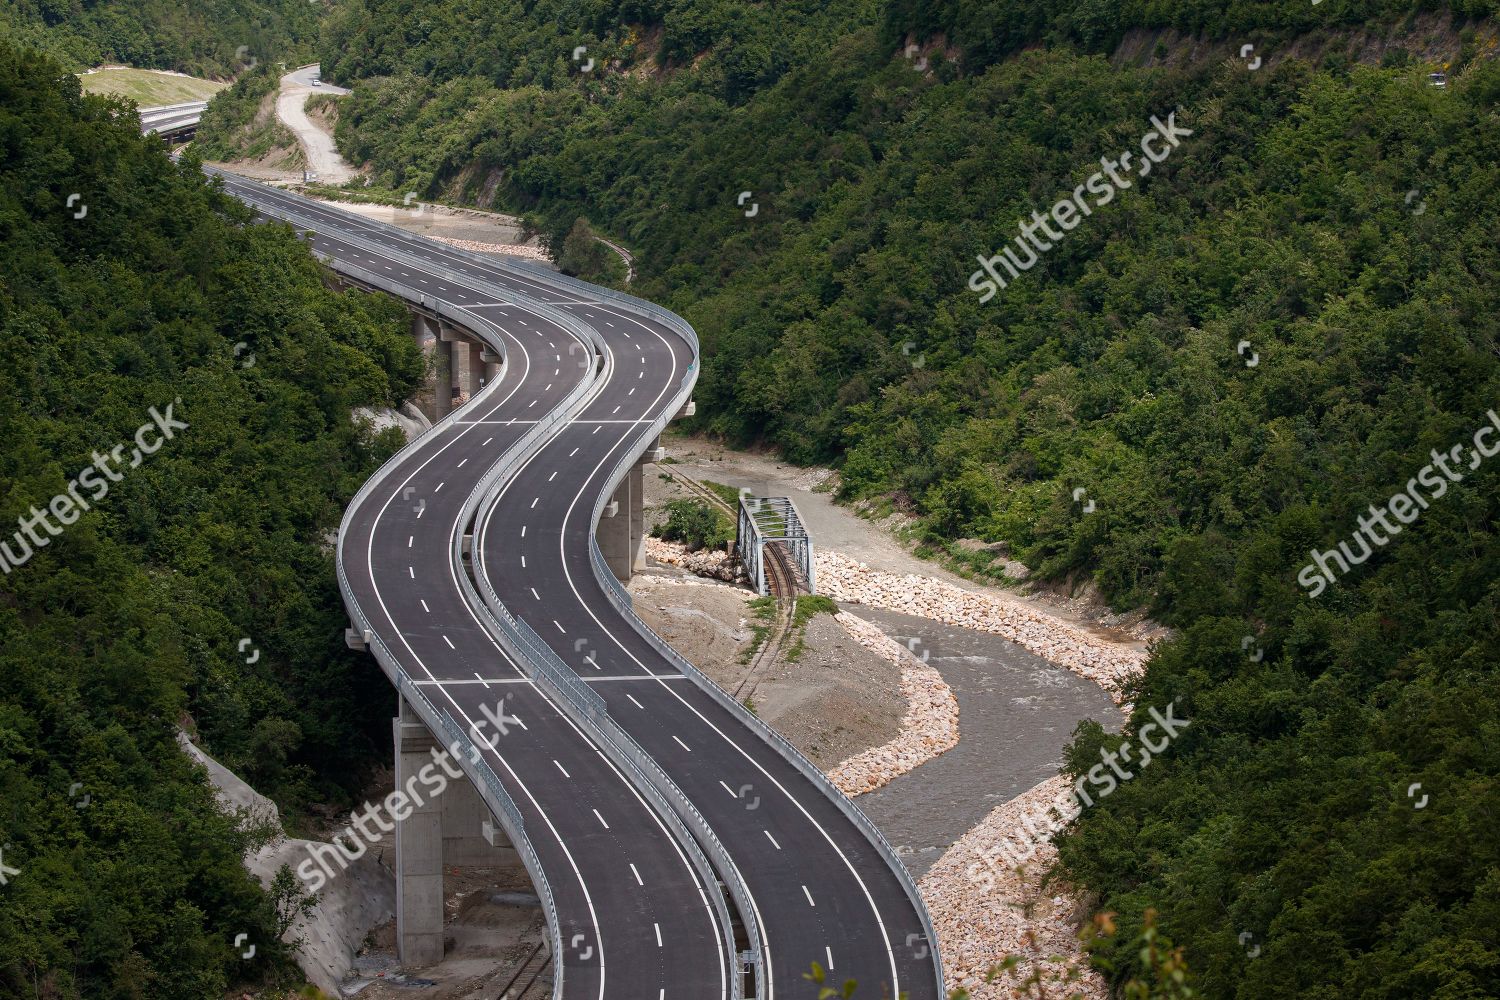 inauguration-ceremony-of-the-motorway-connecting-kosovo-with-north-macedonia-hani-elezit-serbia-shutterstock-editorial-10255693m.jpg